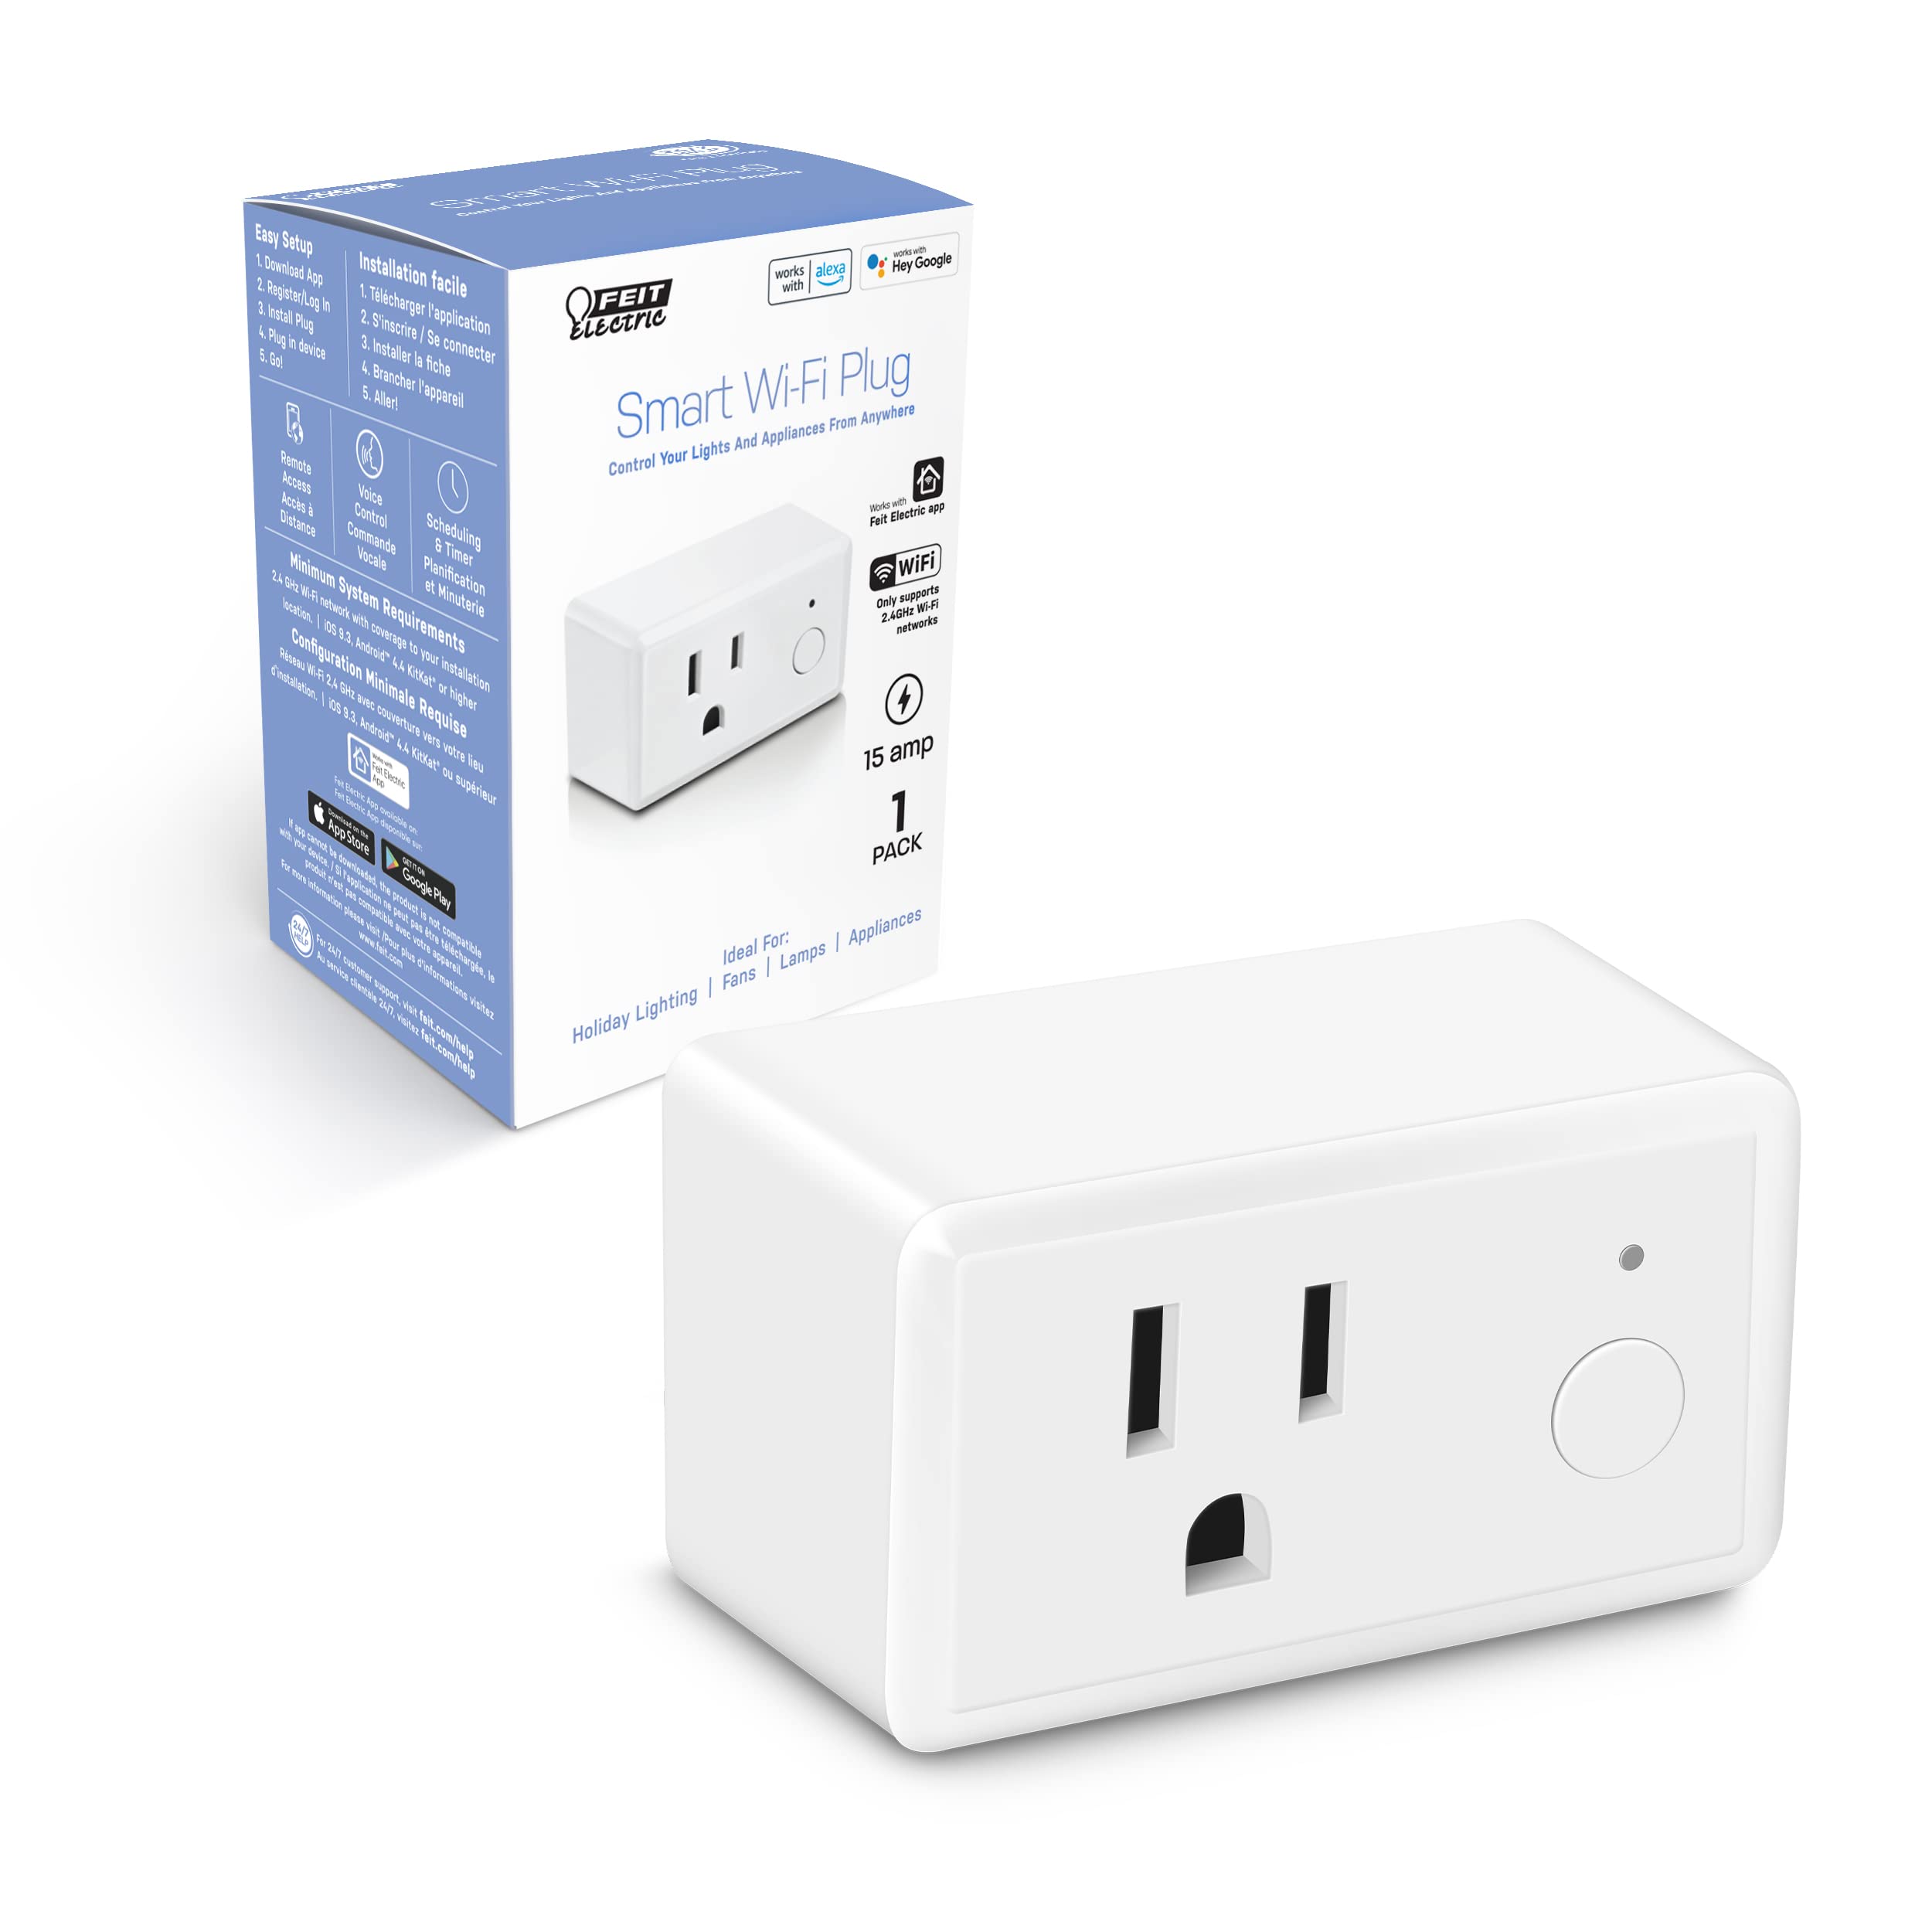 Feit Electric Smart Plug, WiFi Plug Works with Alexa and Google Home, Indoor Plug, No Hub Required, 2.4Ghz Network, Remote Control from Anywhere, 15 AMP, Smart Outlet Plug, White